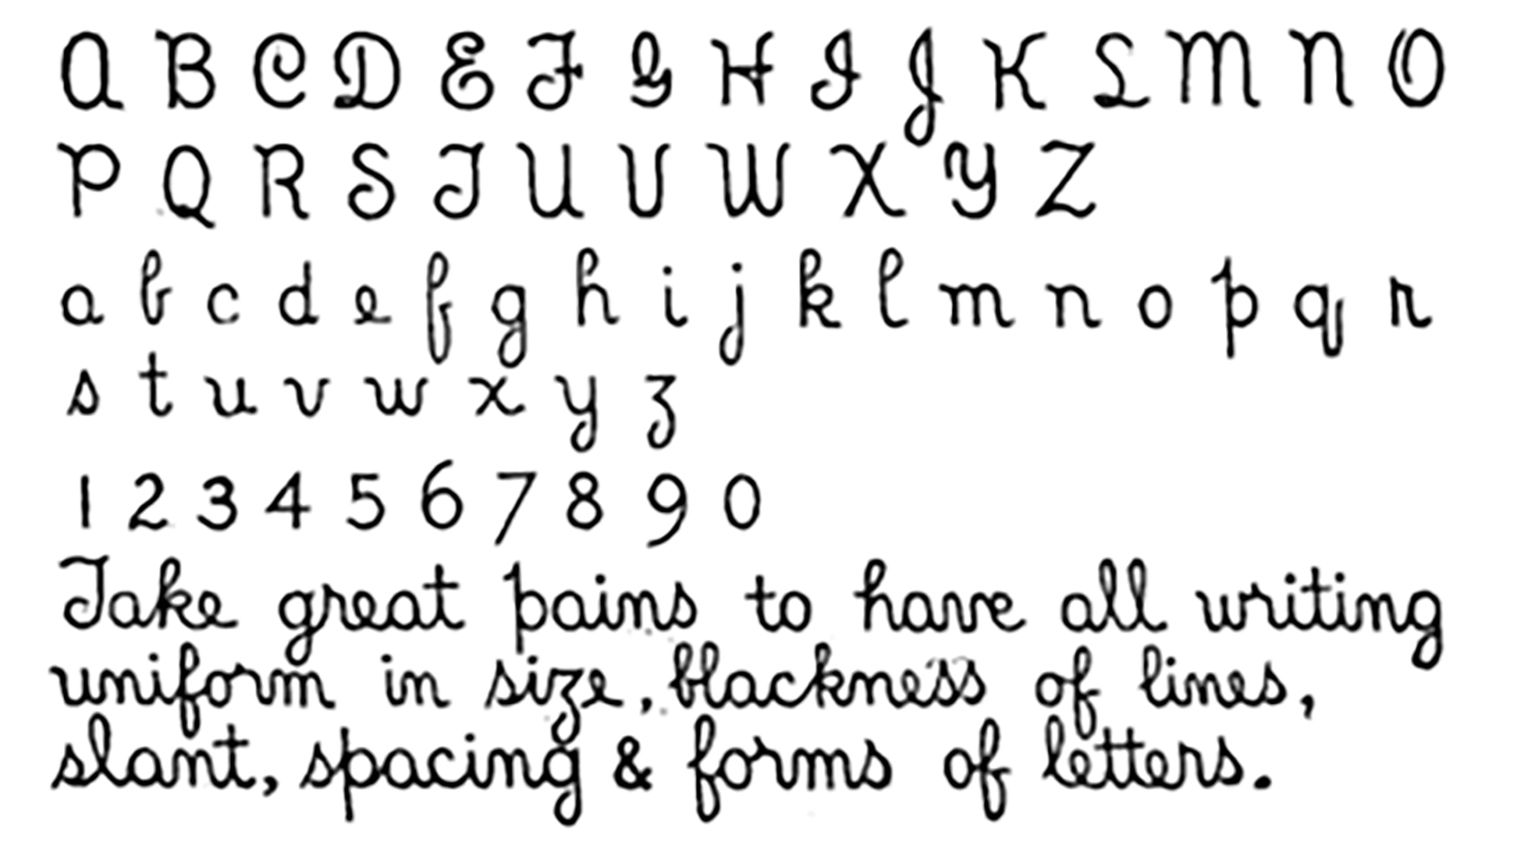 Image of letters and numbers of the original library hand.